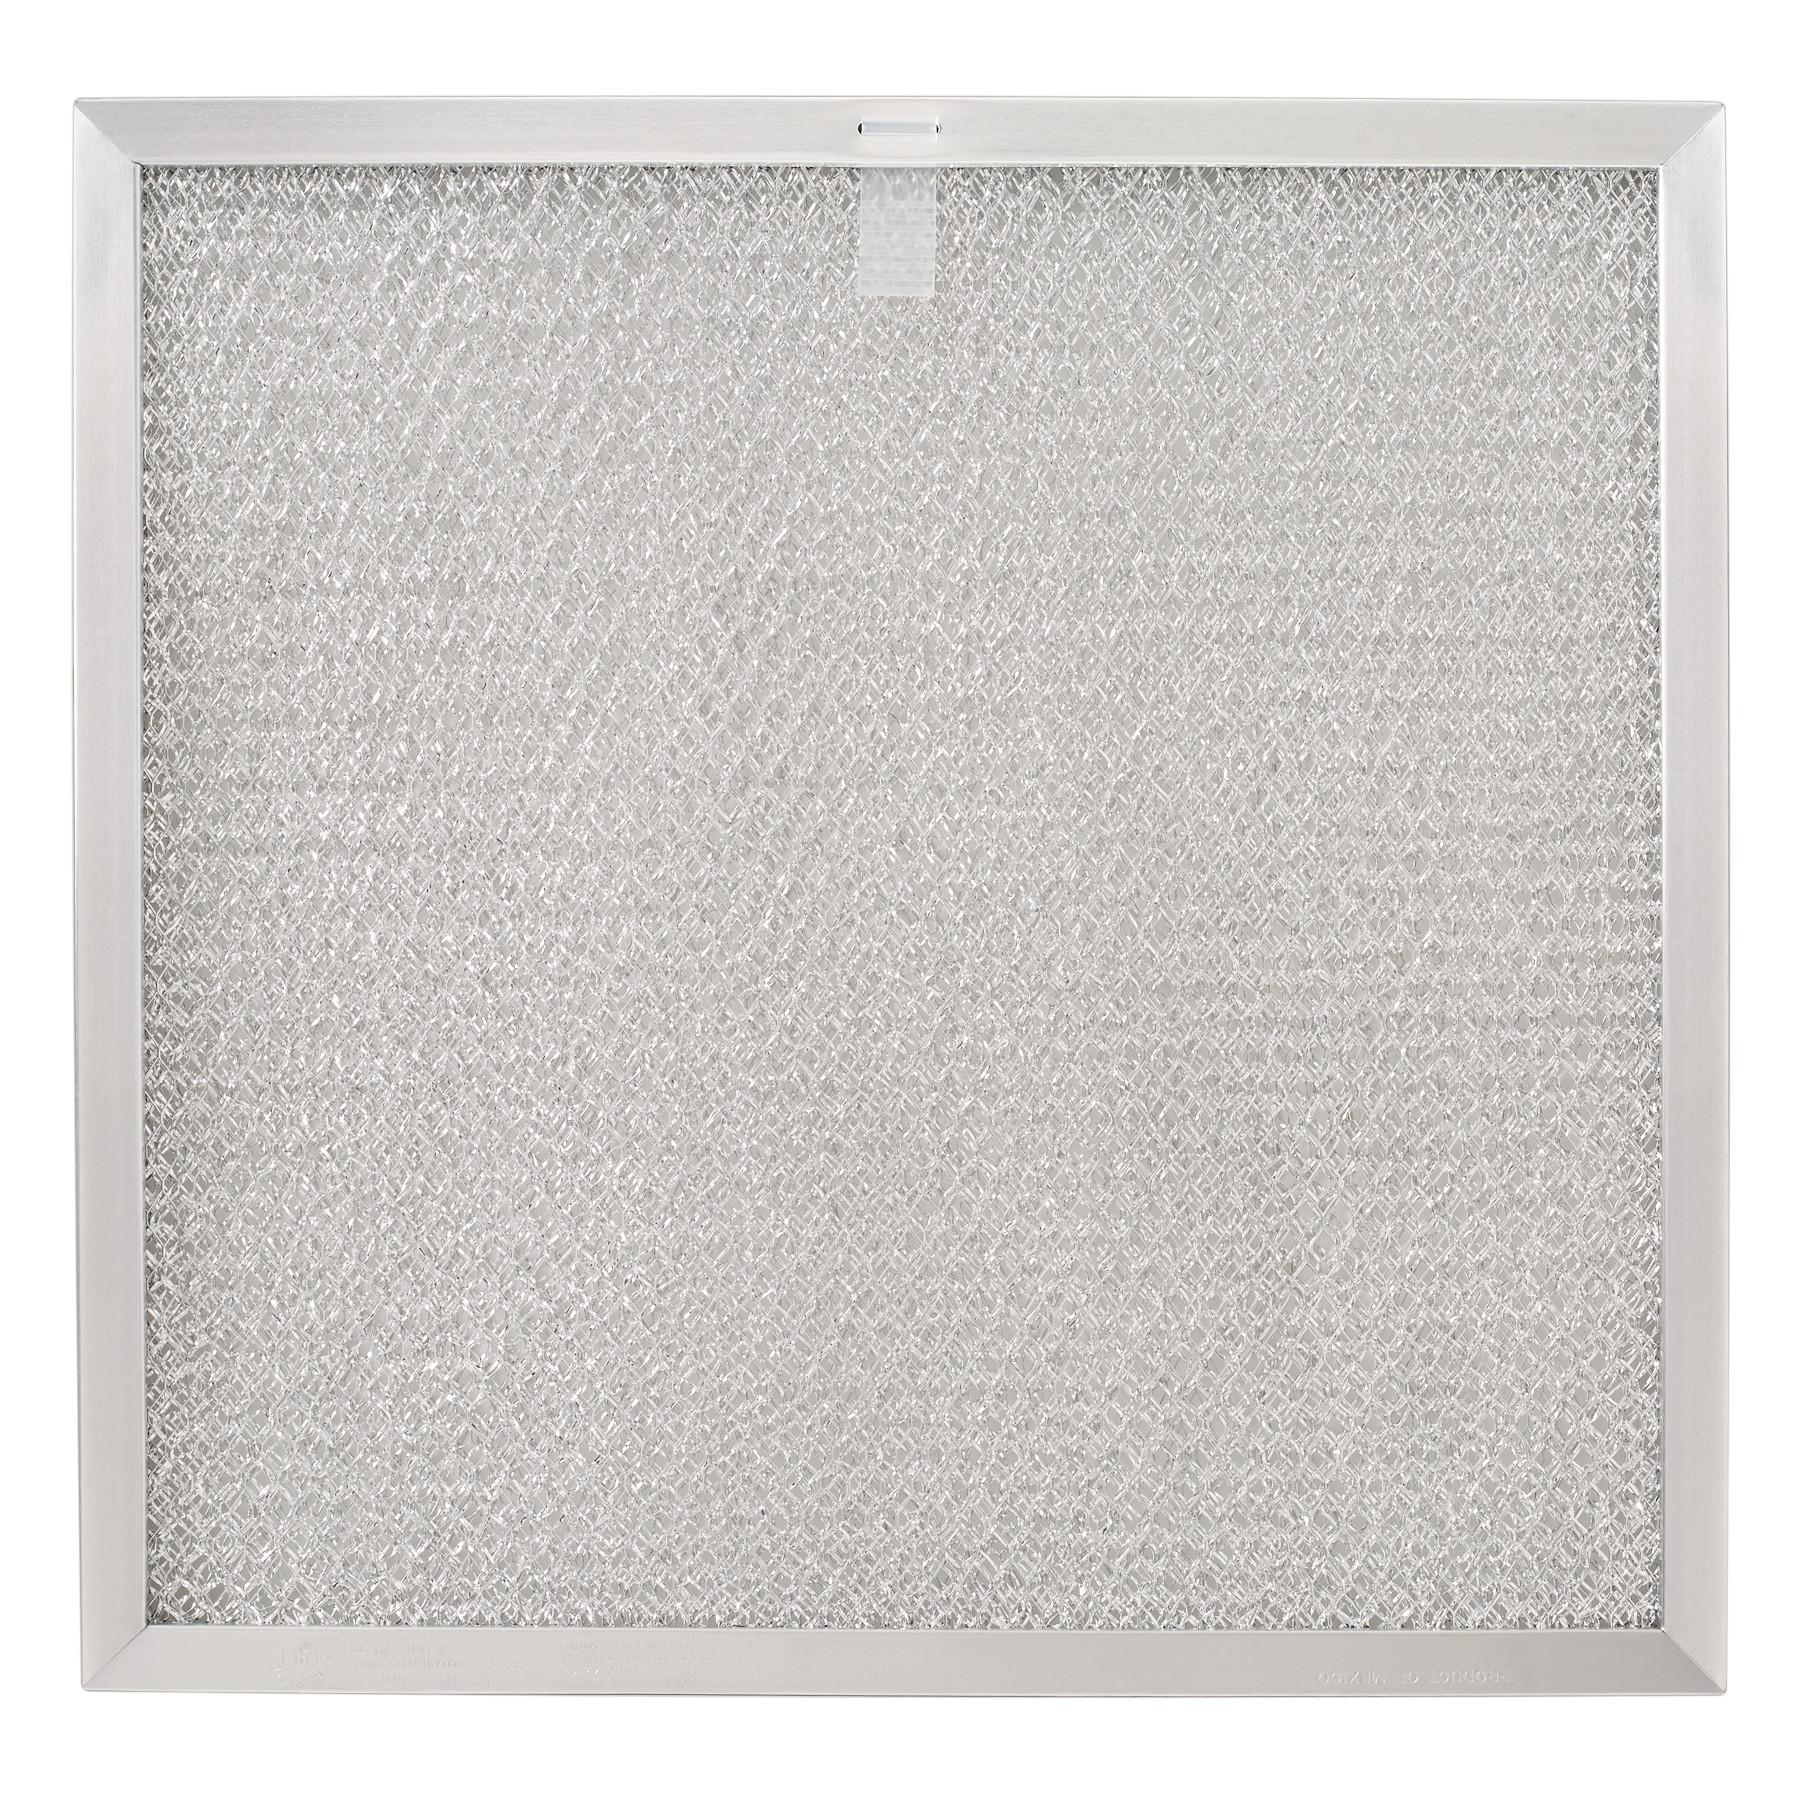 Broan-NuTone® Genuine Replacement Aluminum Filter for Range Hoods, 11-13/16" X 11-7/16", Fits Select Models